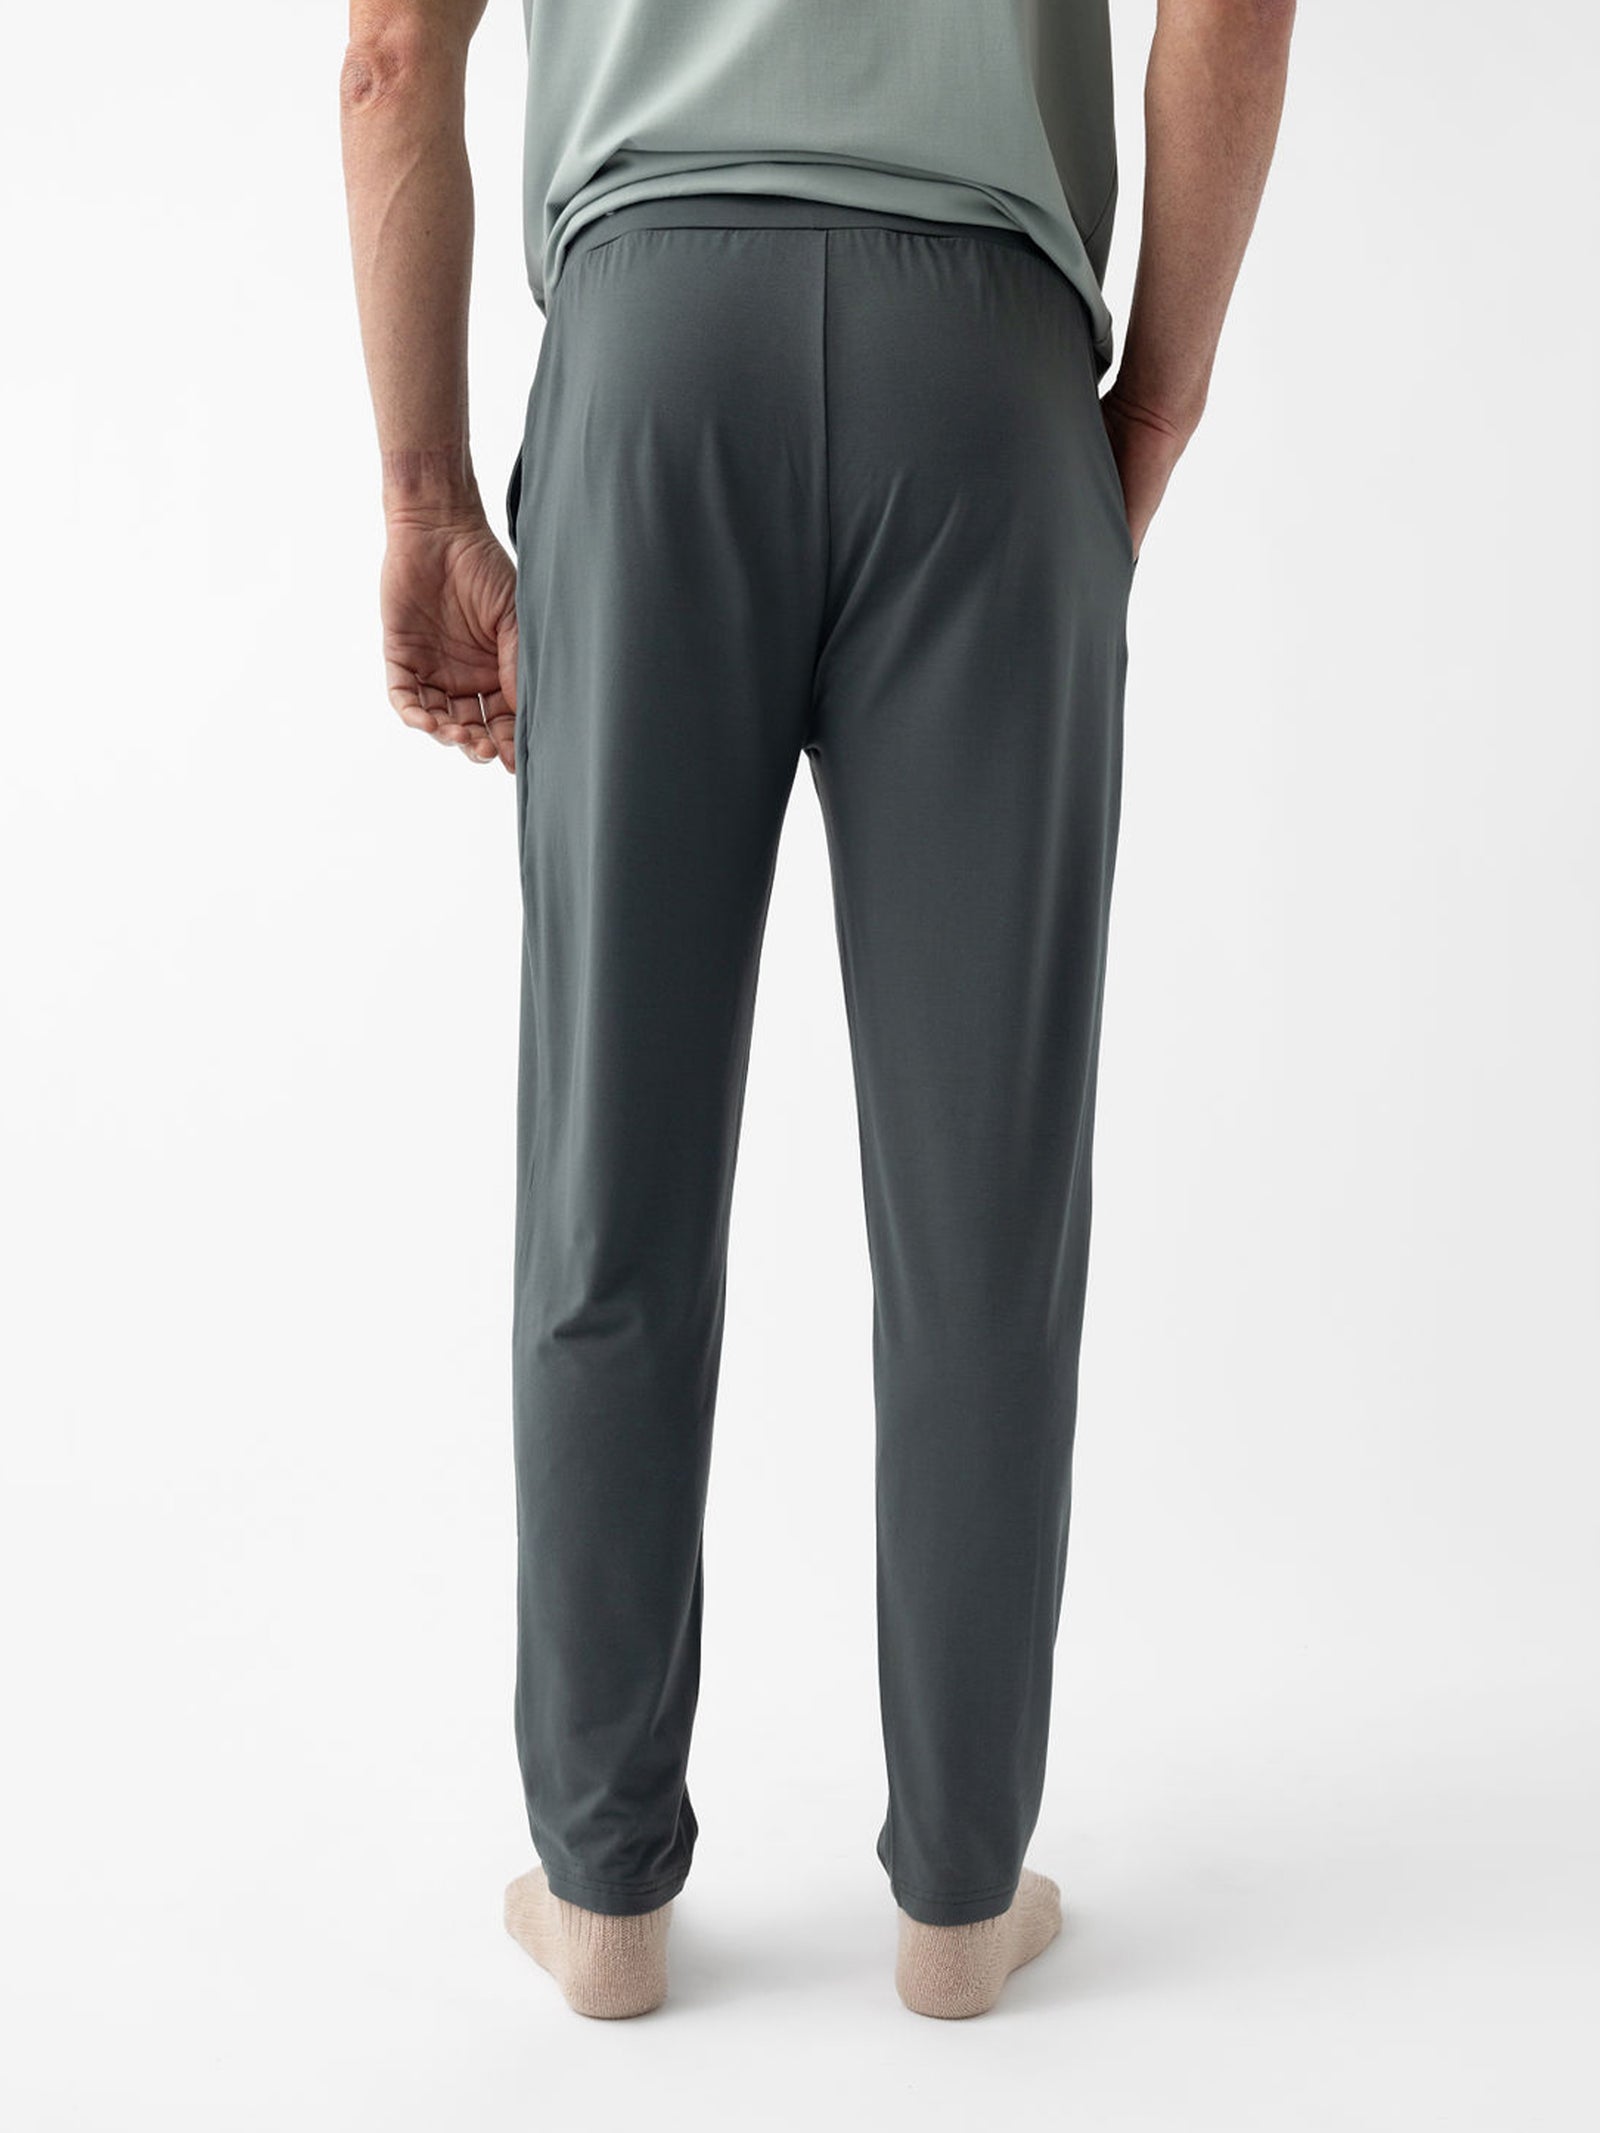 Back of man wearing storm pajama pants with white background 